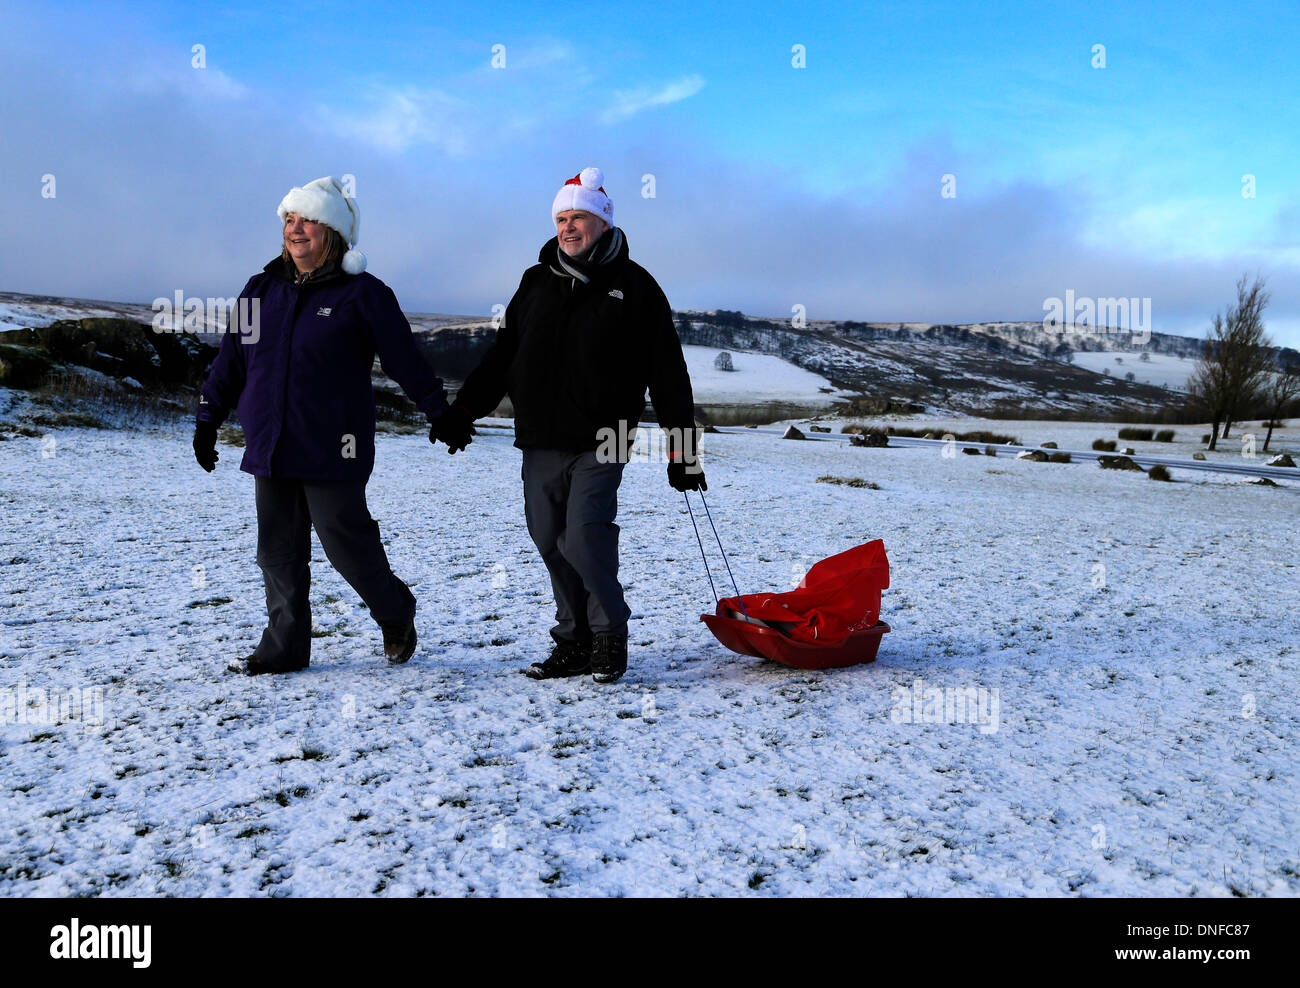 Buxton, Derbyshire, UK. 25th Dec, 2013.  After waking up to a white Christmas, Colin Chandler and Judith Irwin use a sledge to deliver Christmas presents on Christmas Day in Buxton in the Derbyshire Peak District. Credit:  Joanne Roberts/Alamy Live News Stock Photo